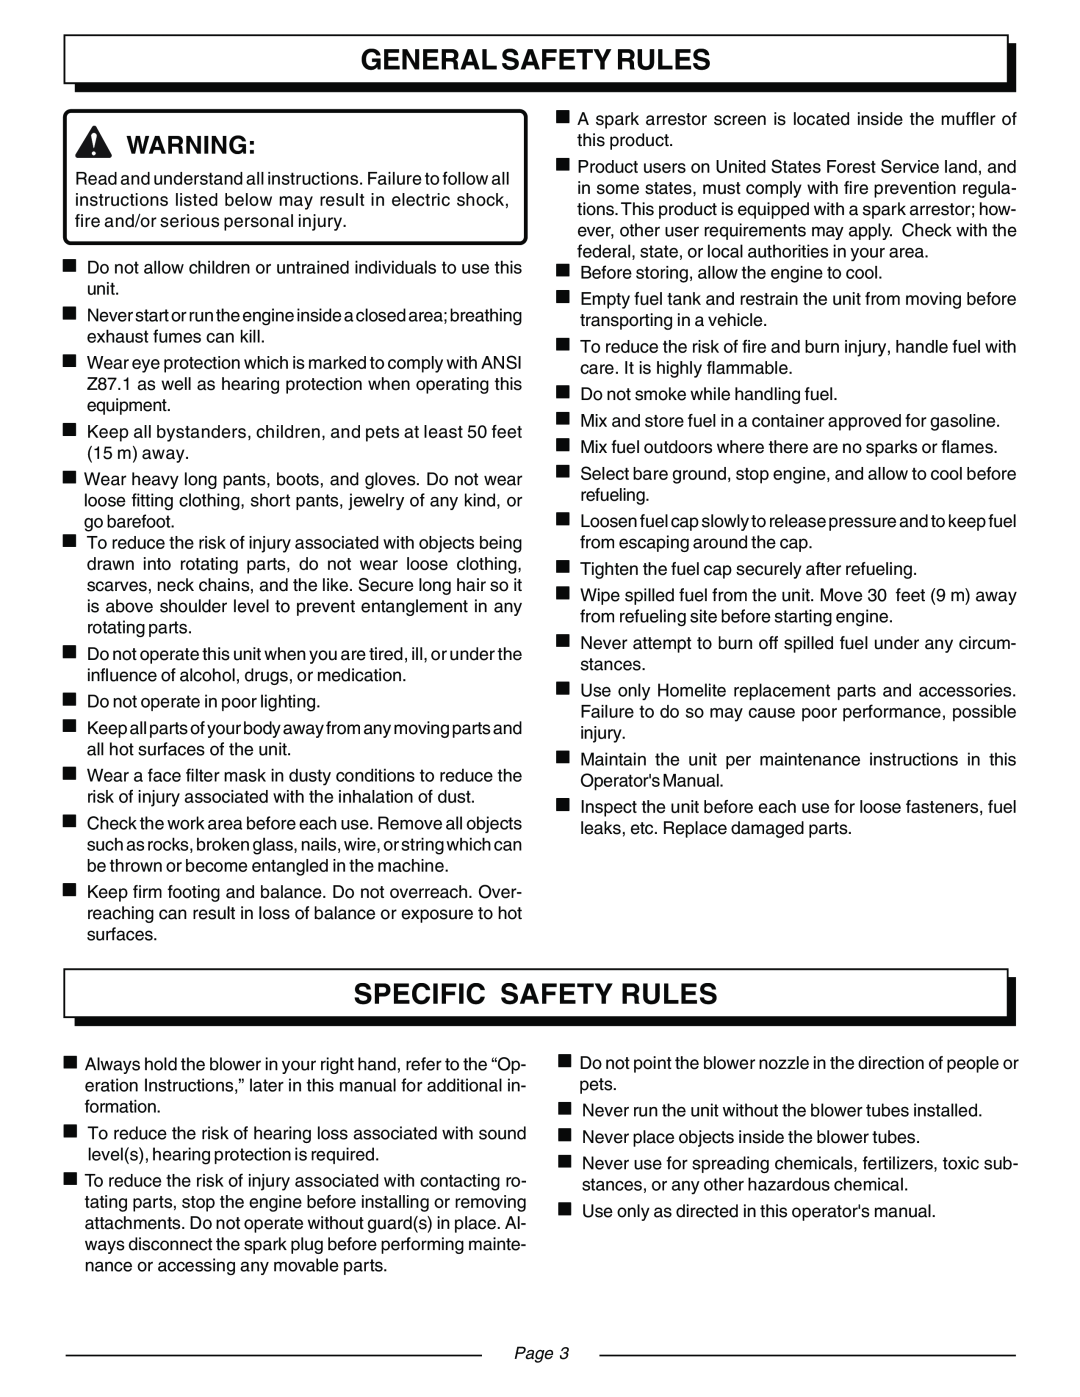 Homelite ZR08110 manual General Safety Rules, Specific Safety Rules, Page 